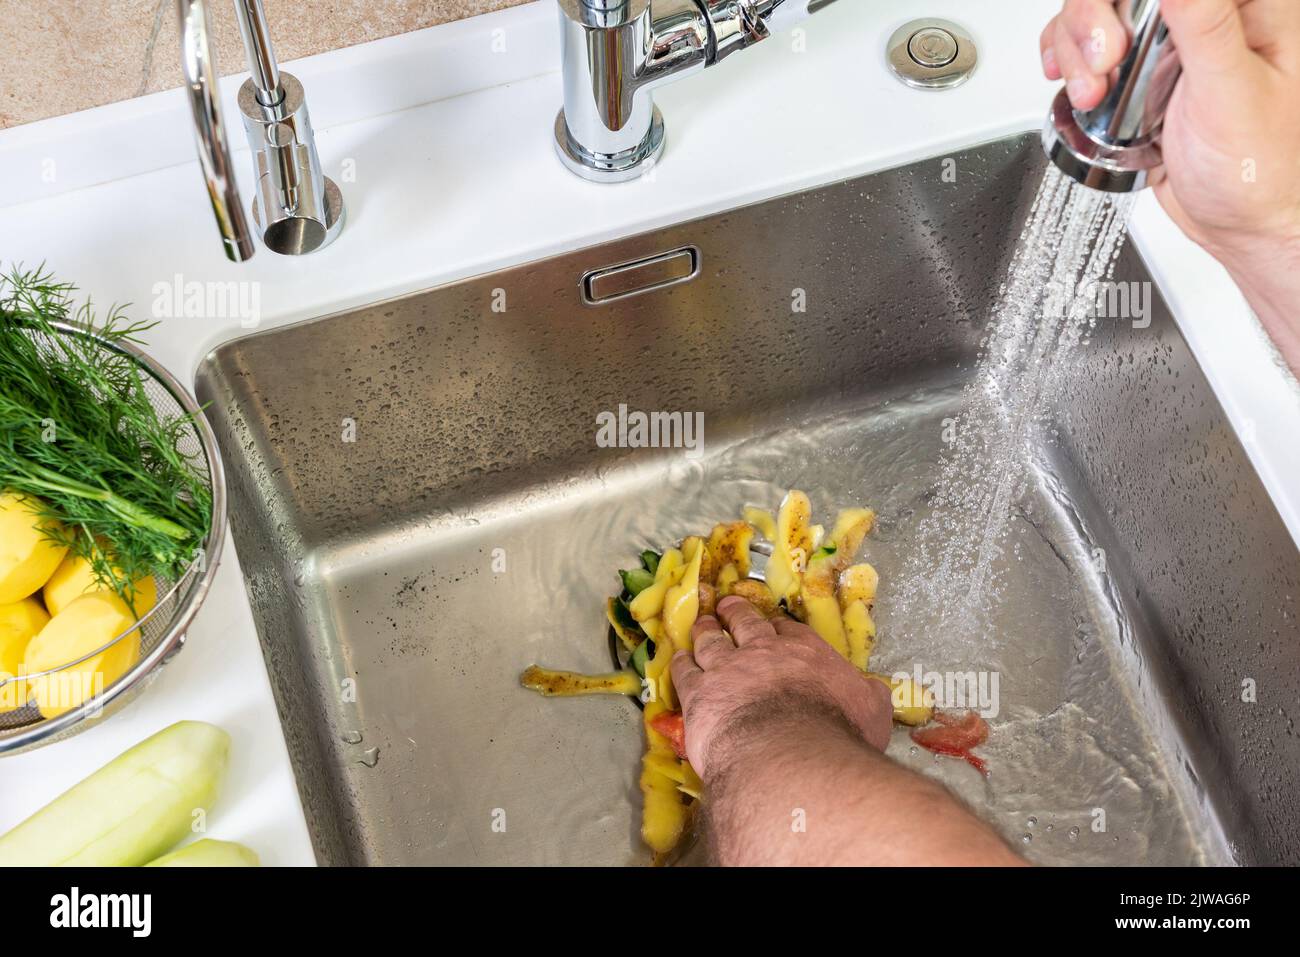 https://c8.alamy.com/comp/2JWAG6P/recycling-food-waste-with-a-disposer-in-the-kitchen-sink-2JWAG6P.jpg